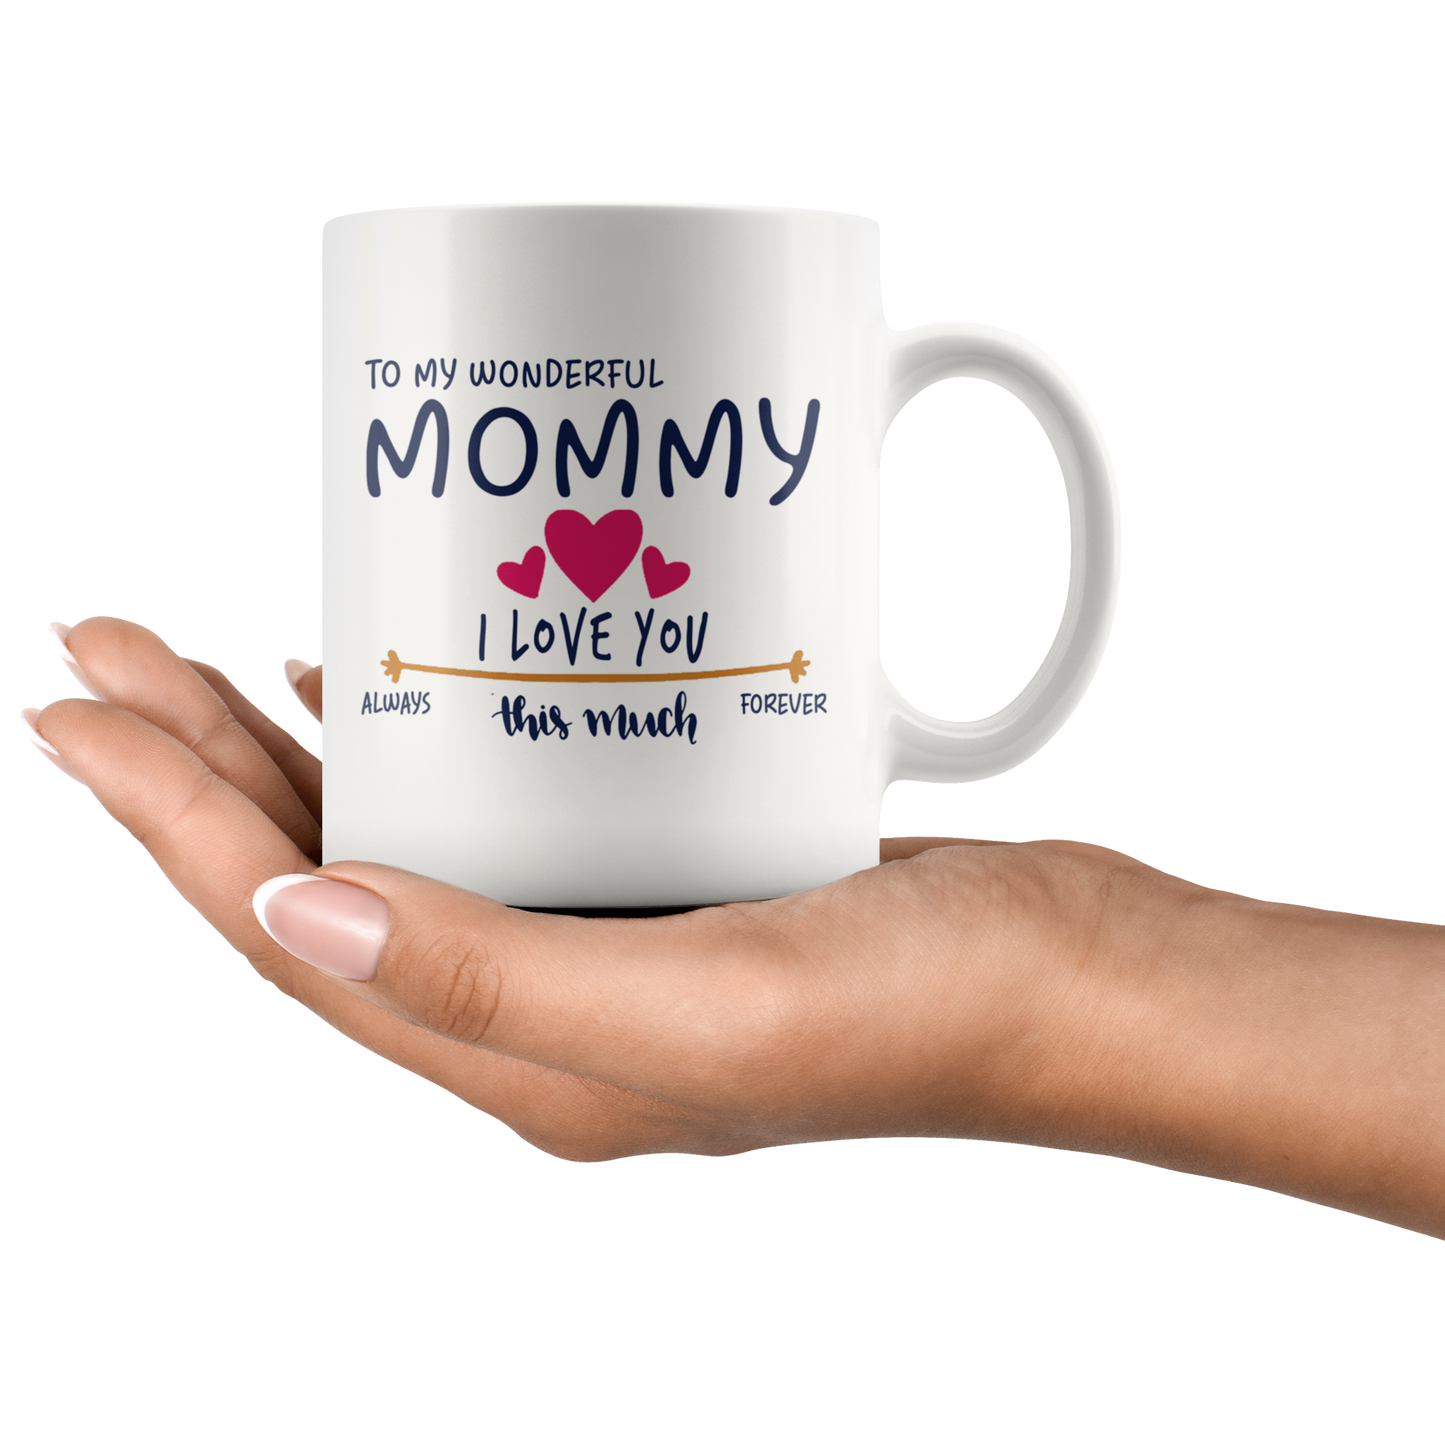 M-20470216-sp-23482 - Mom Day Gifts From Daughter or Son - To My Wonderful Mommy I